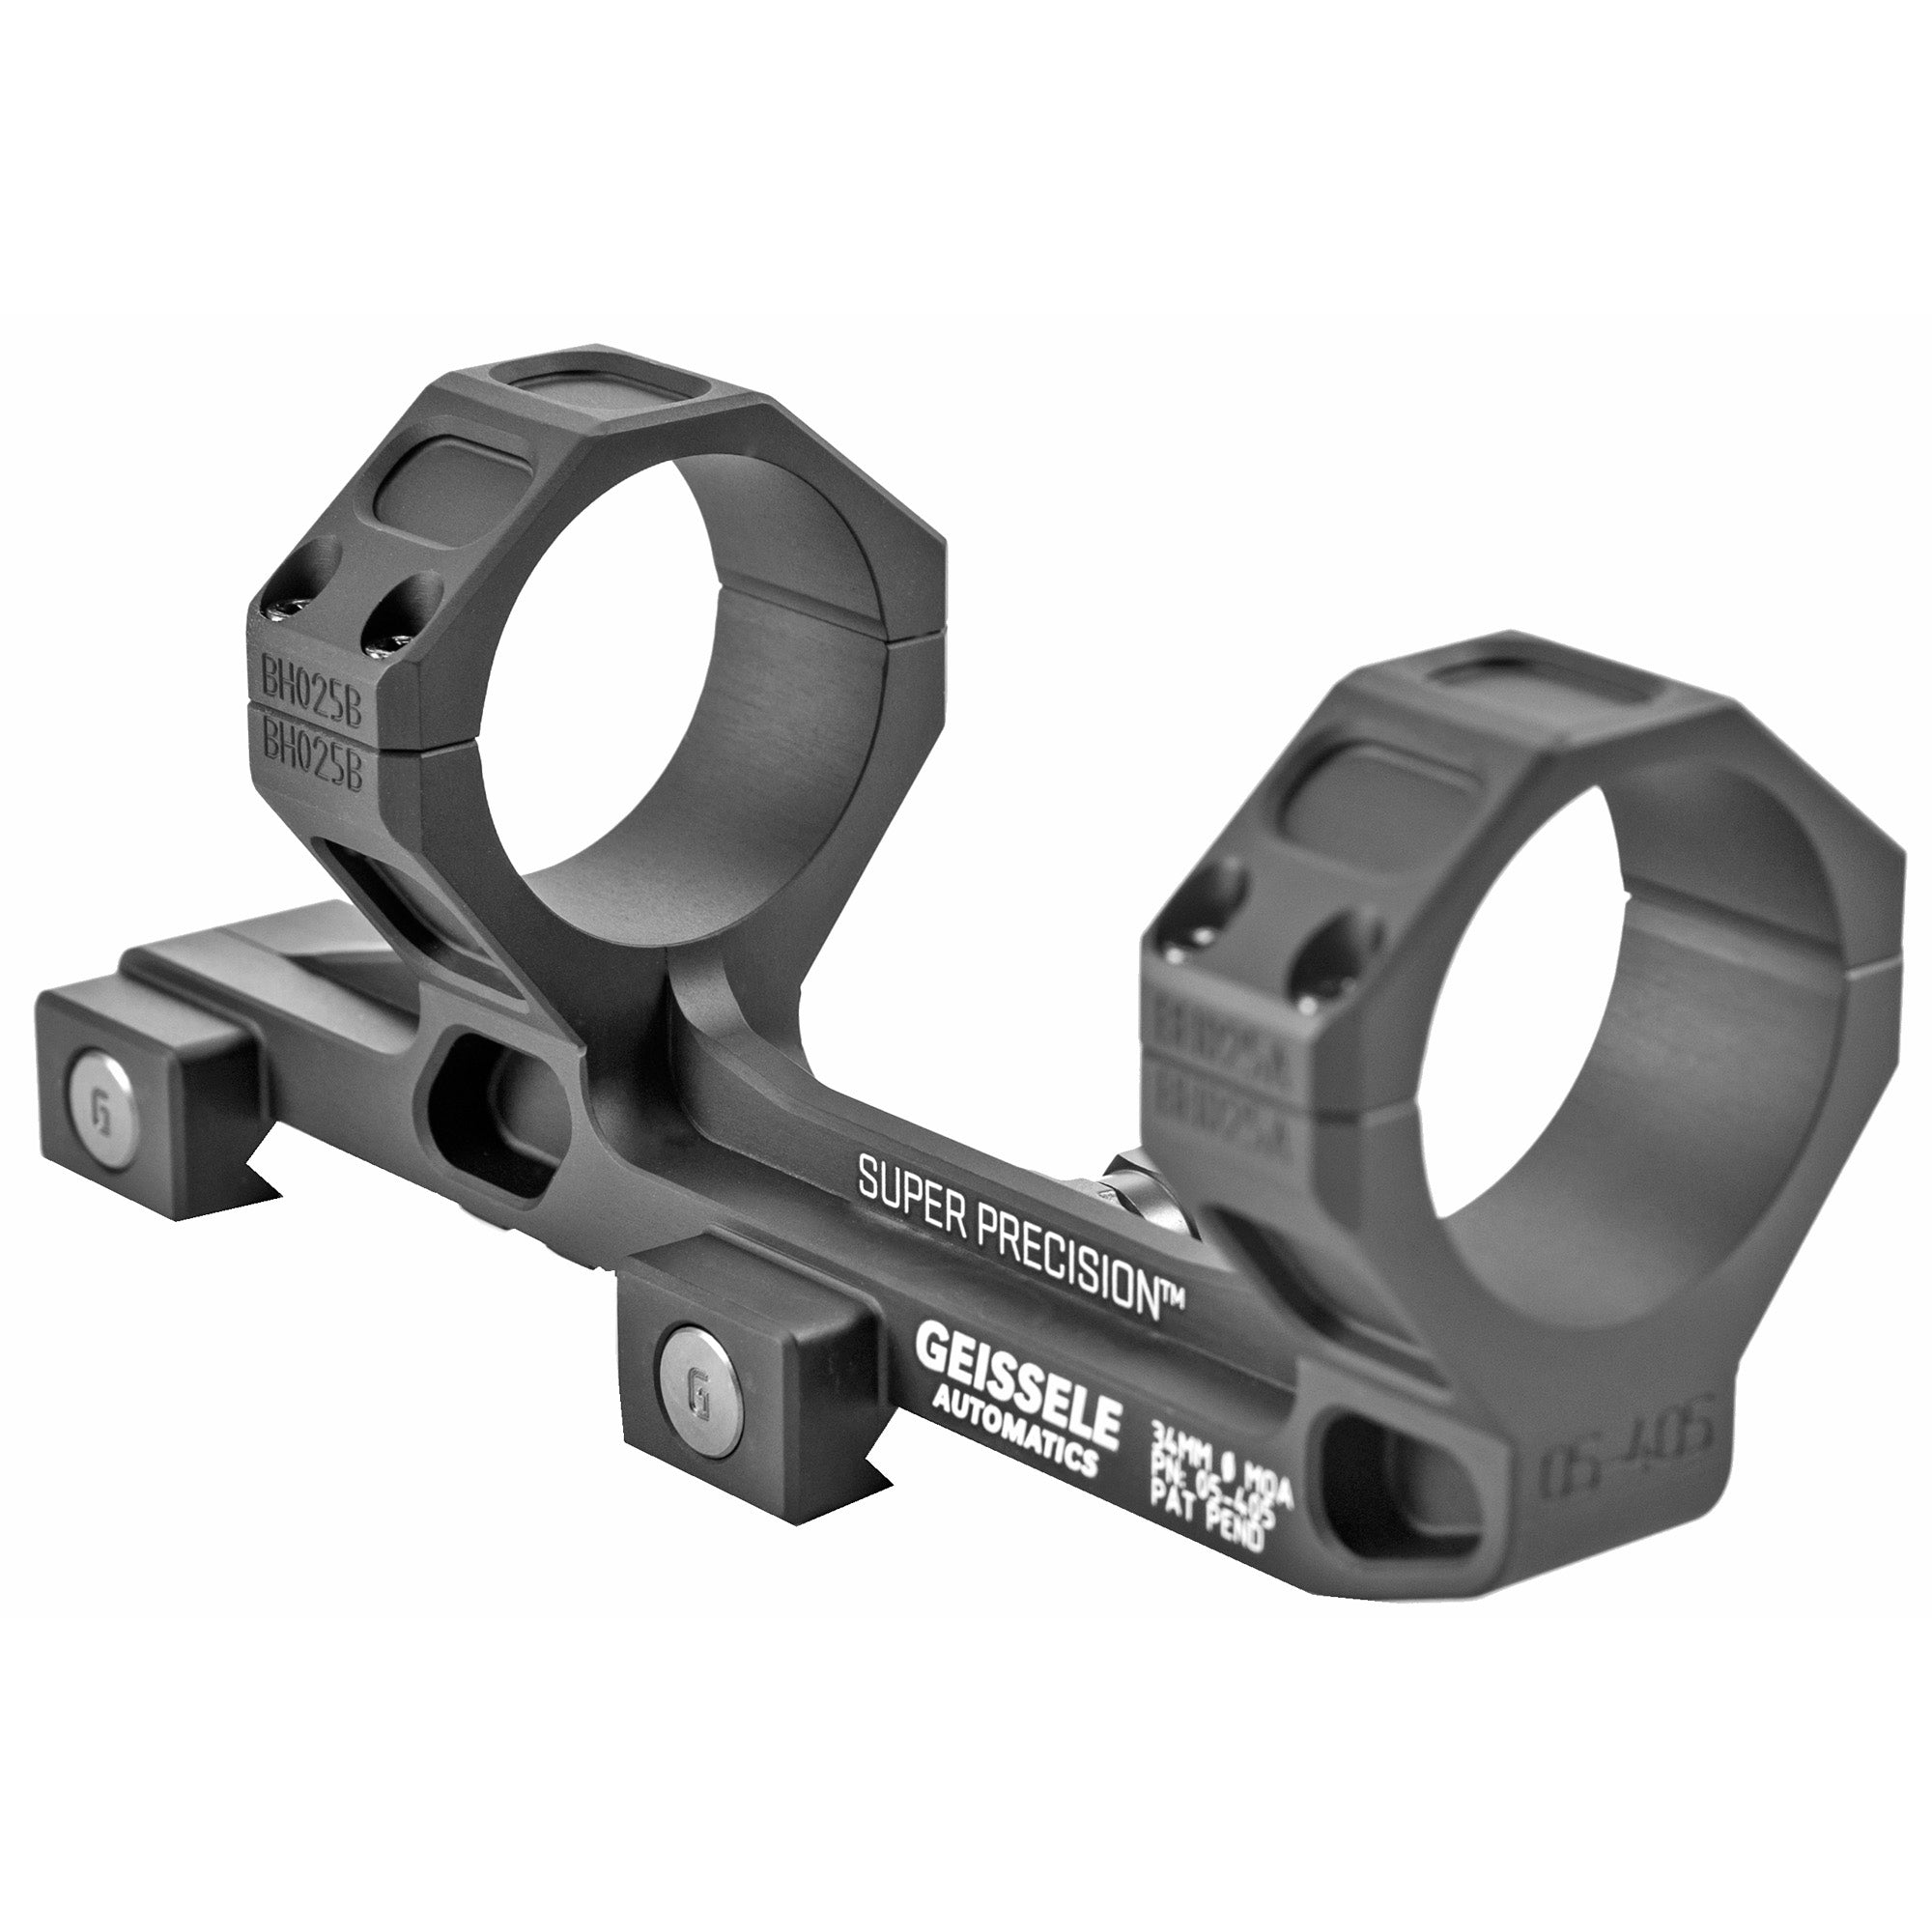 Geissele Automatics Super Precision Extended Scope Mount, 30mm, in Black Anodized Finish, designed for optimal performance and durability.